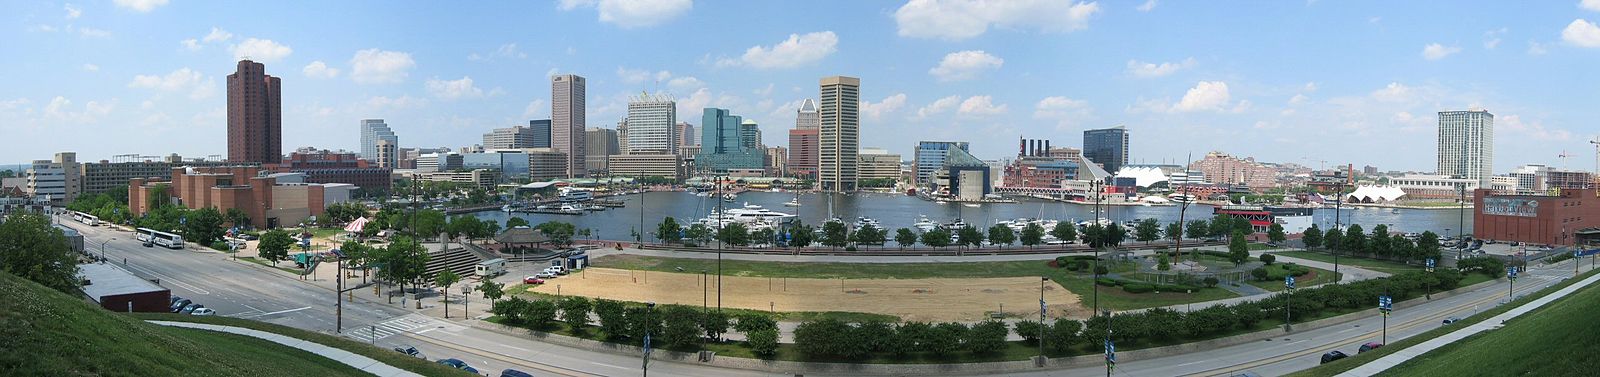 Inner Harbor, Baltimore, surrounded by buildings